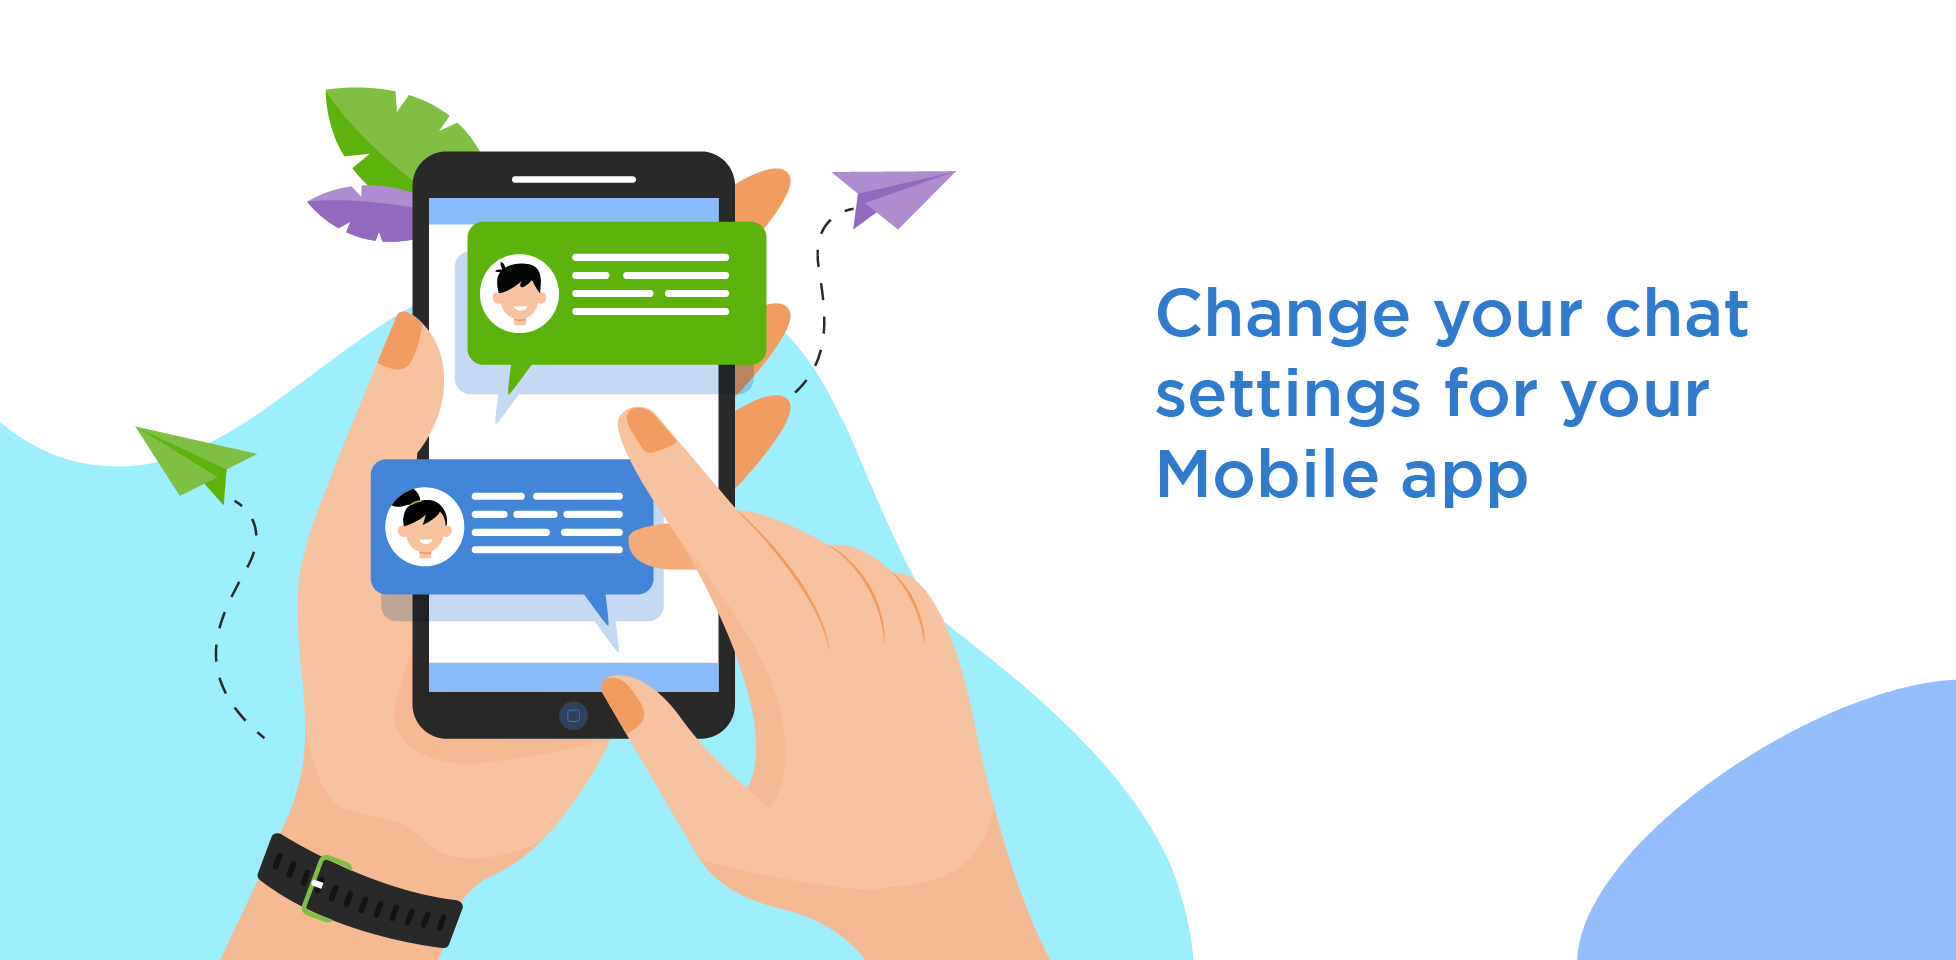 Change your chat settings for your Mobile app